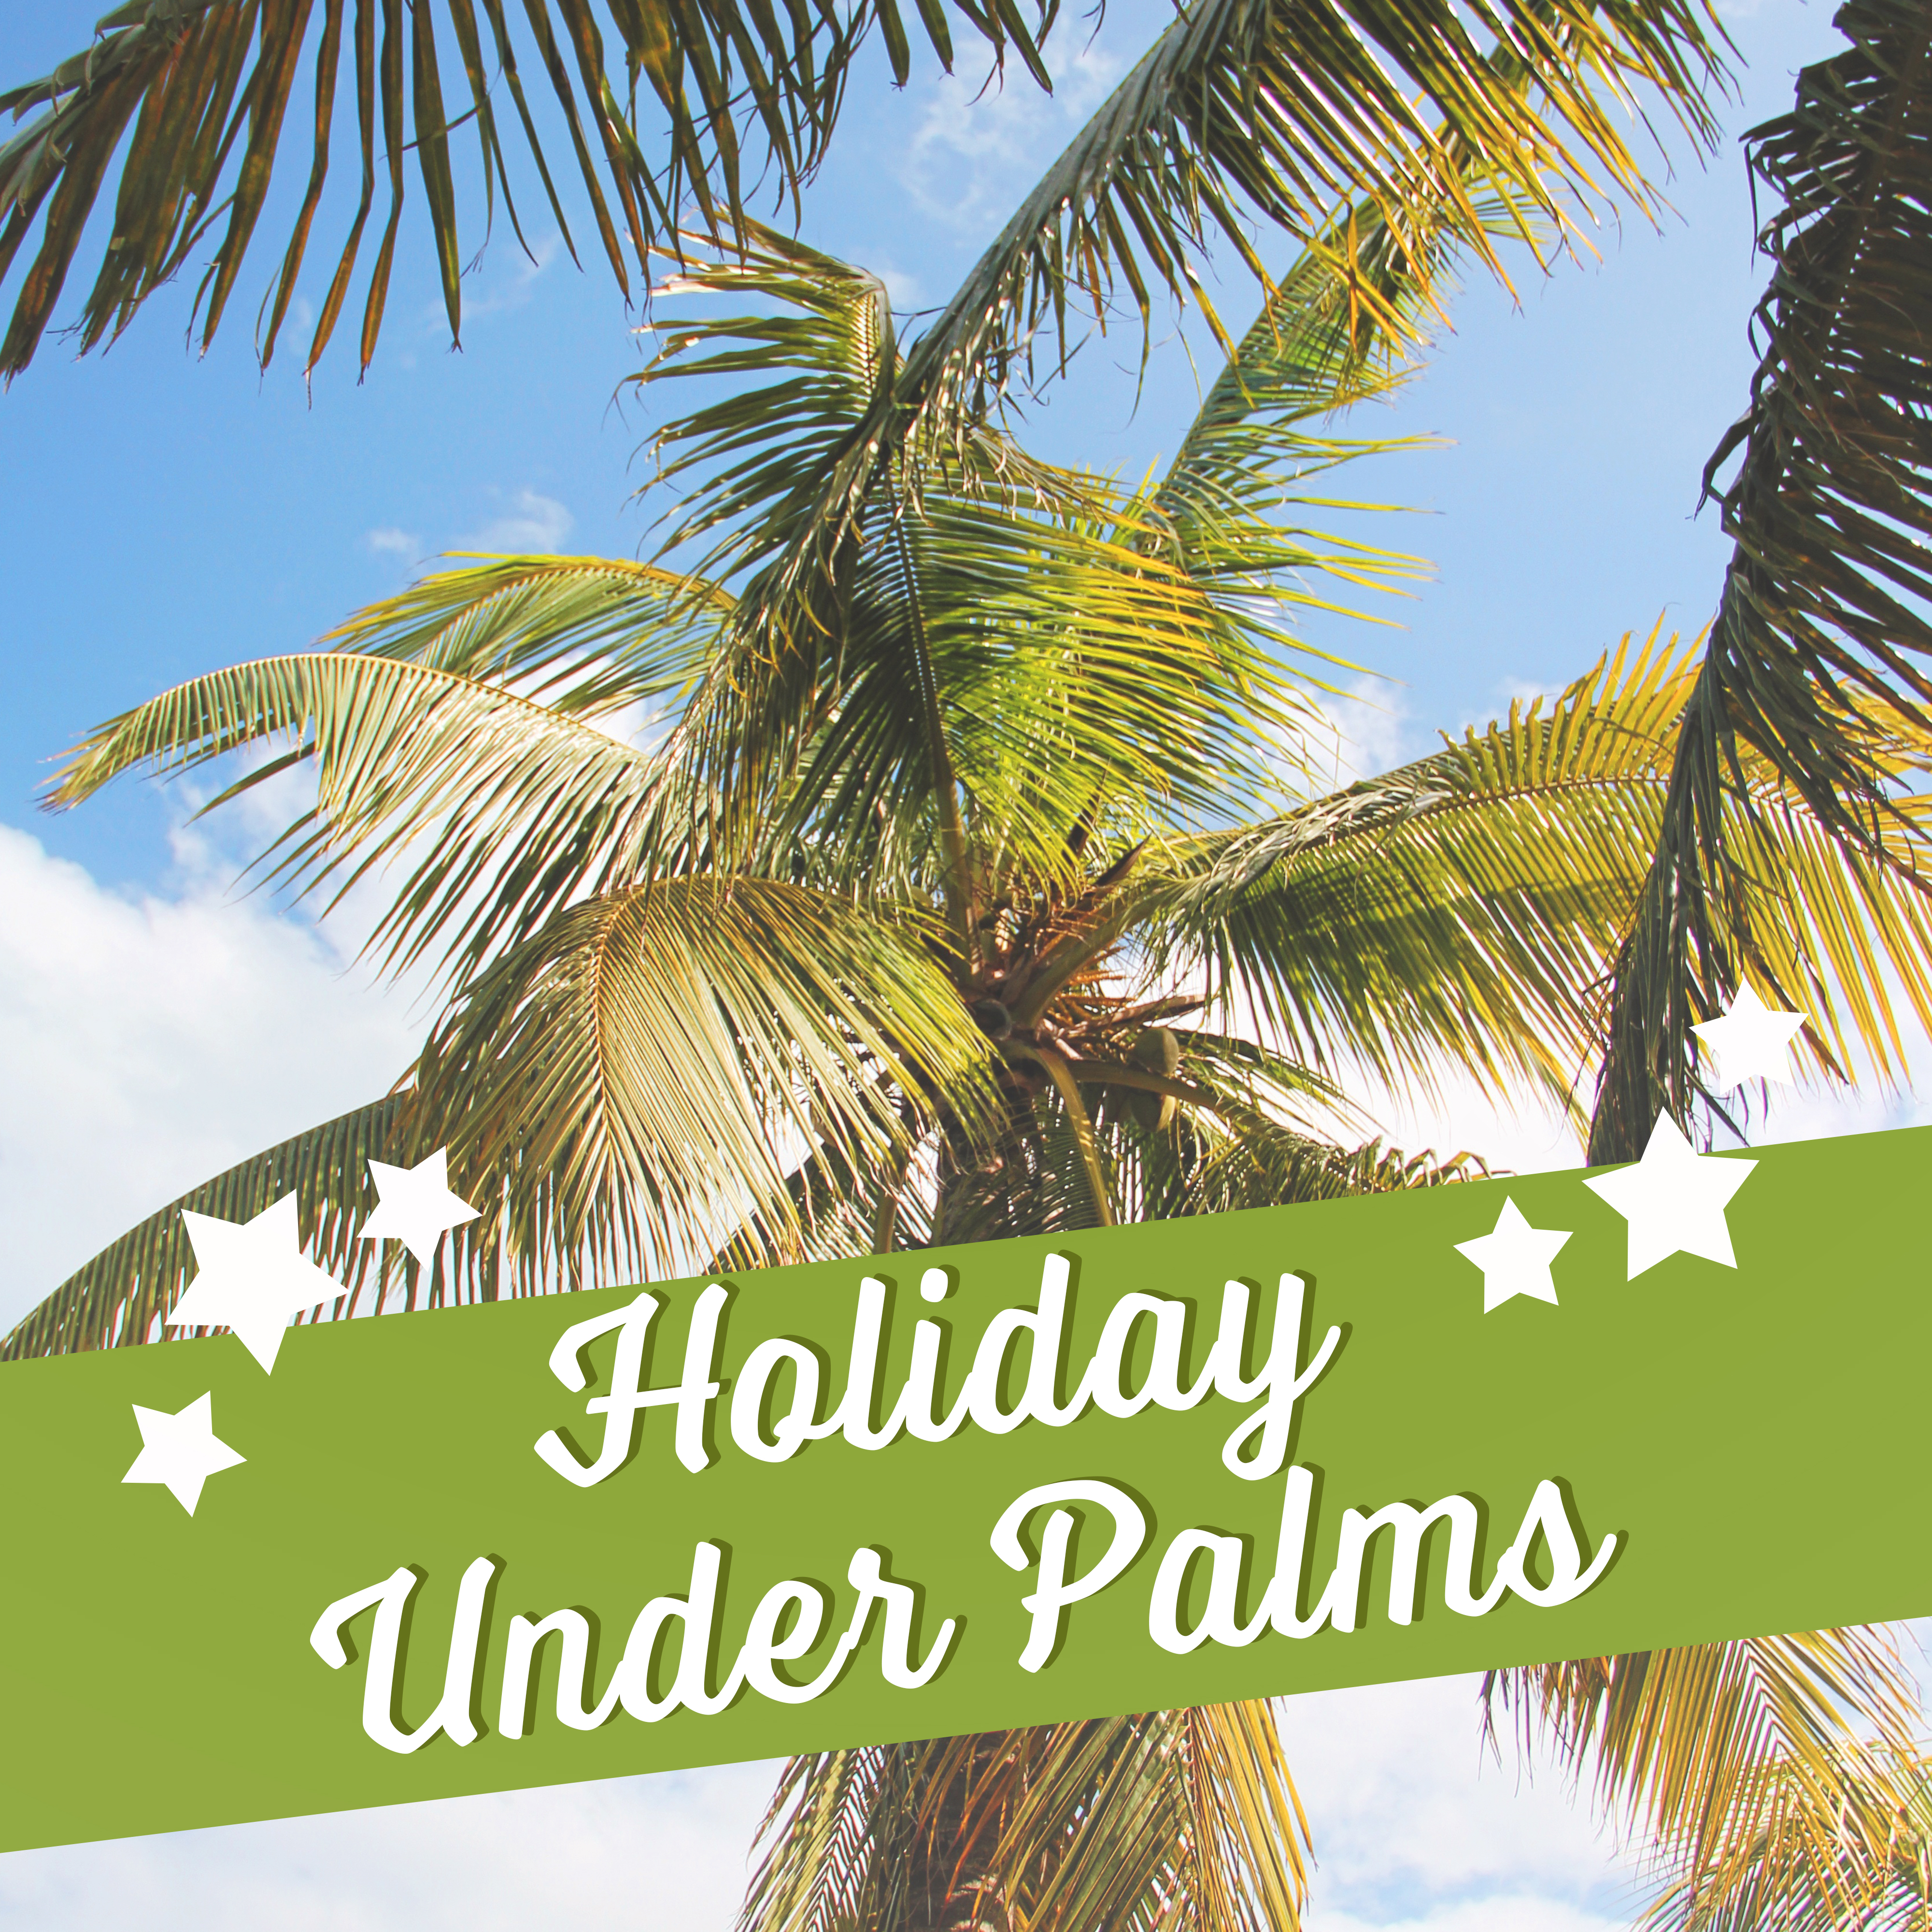 Holiday Under Palms – Chill Out Music, Beach Chill, Stress Free, Ocean Dreams, Holiday Songs, Cocktails & Drinks on the Beach, Summertime